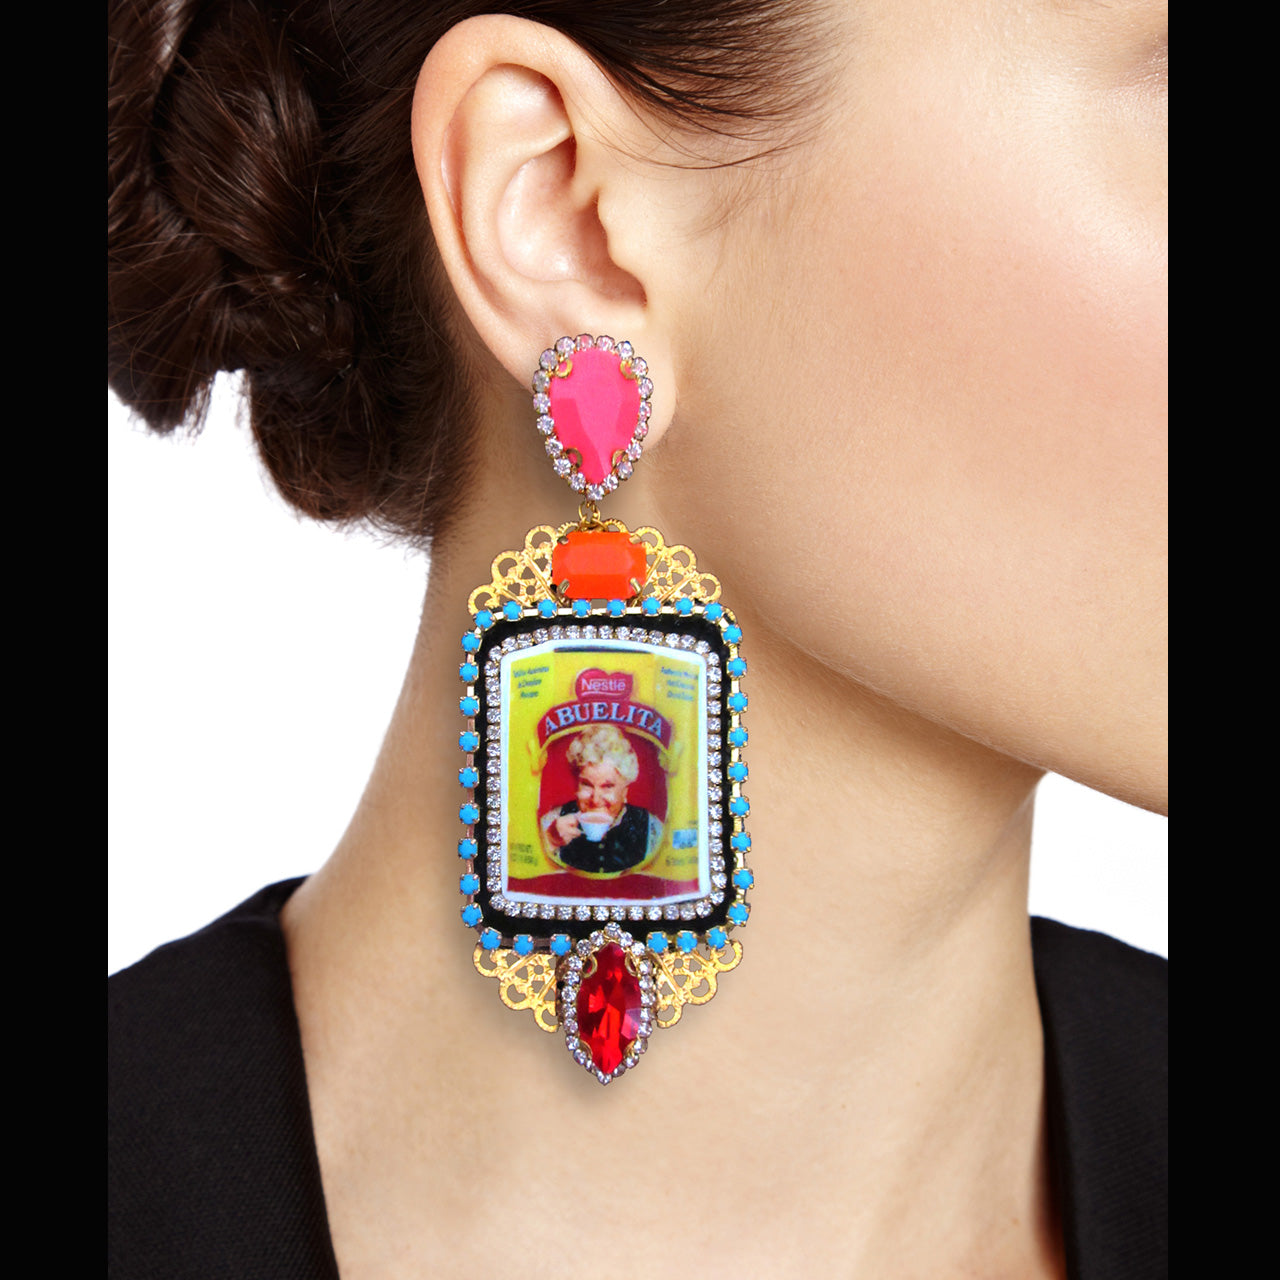 mouchkine jewelry earrings, an abuelita retro chic picture with red, pink and orange crystals. A unique style with a haute couture tone.